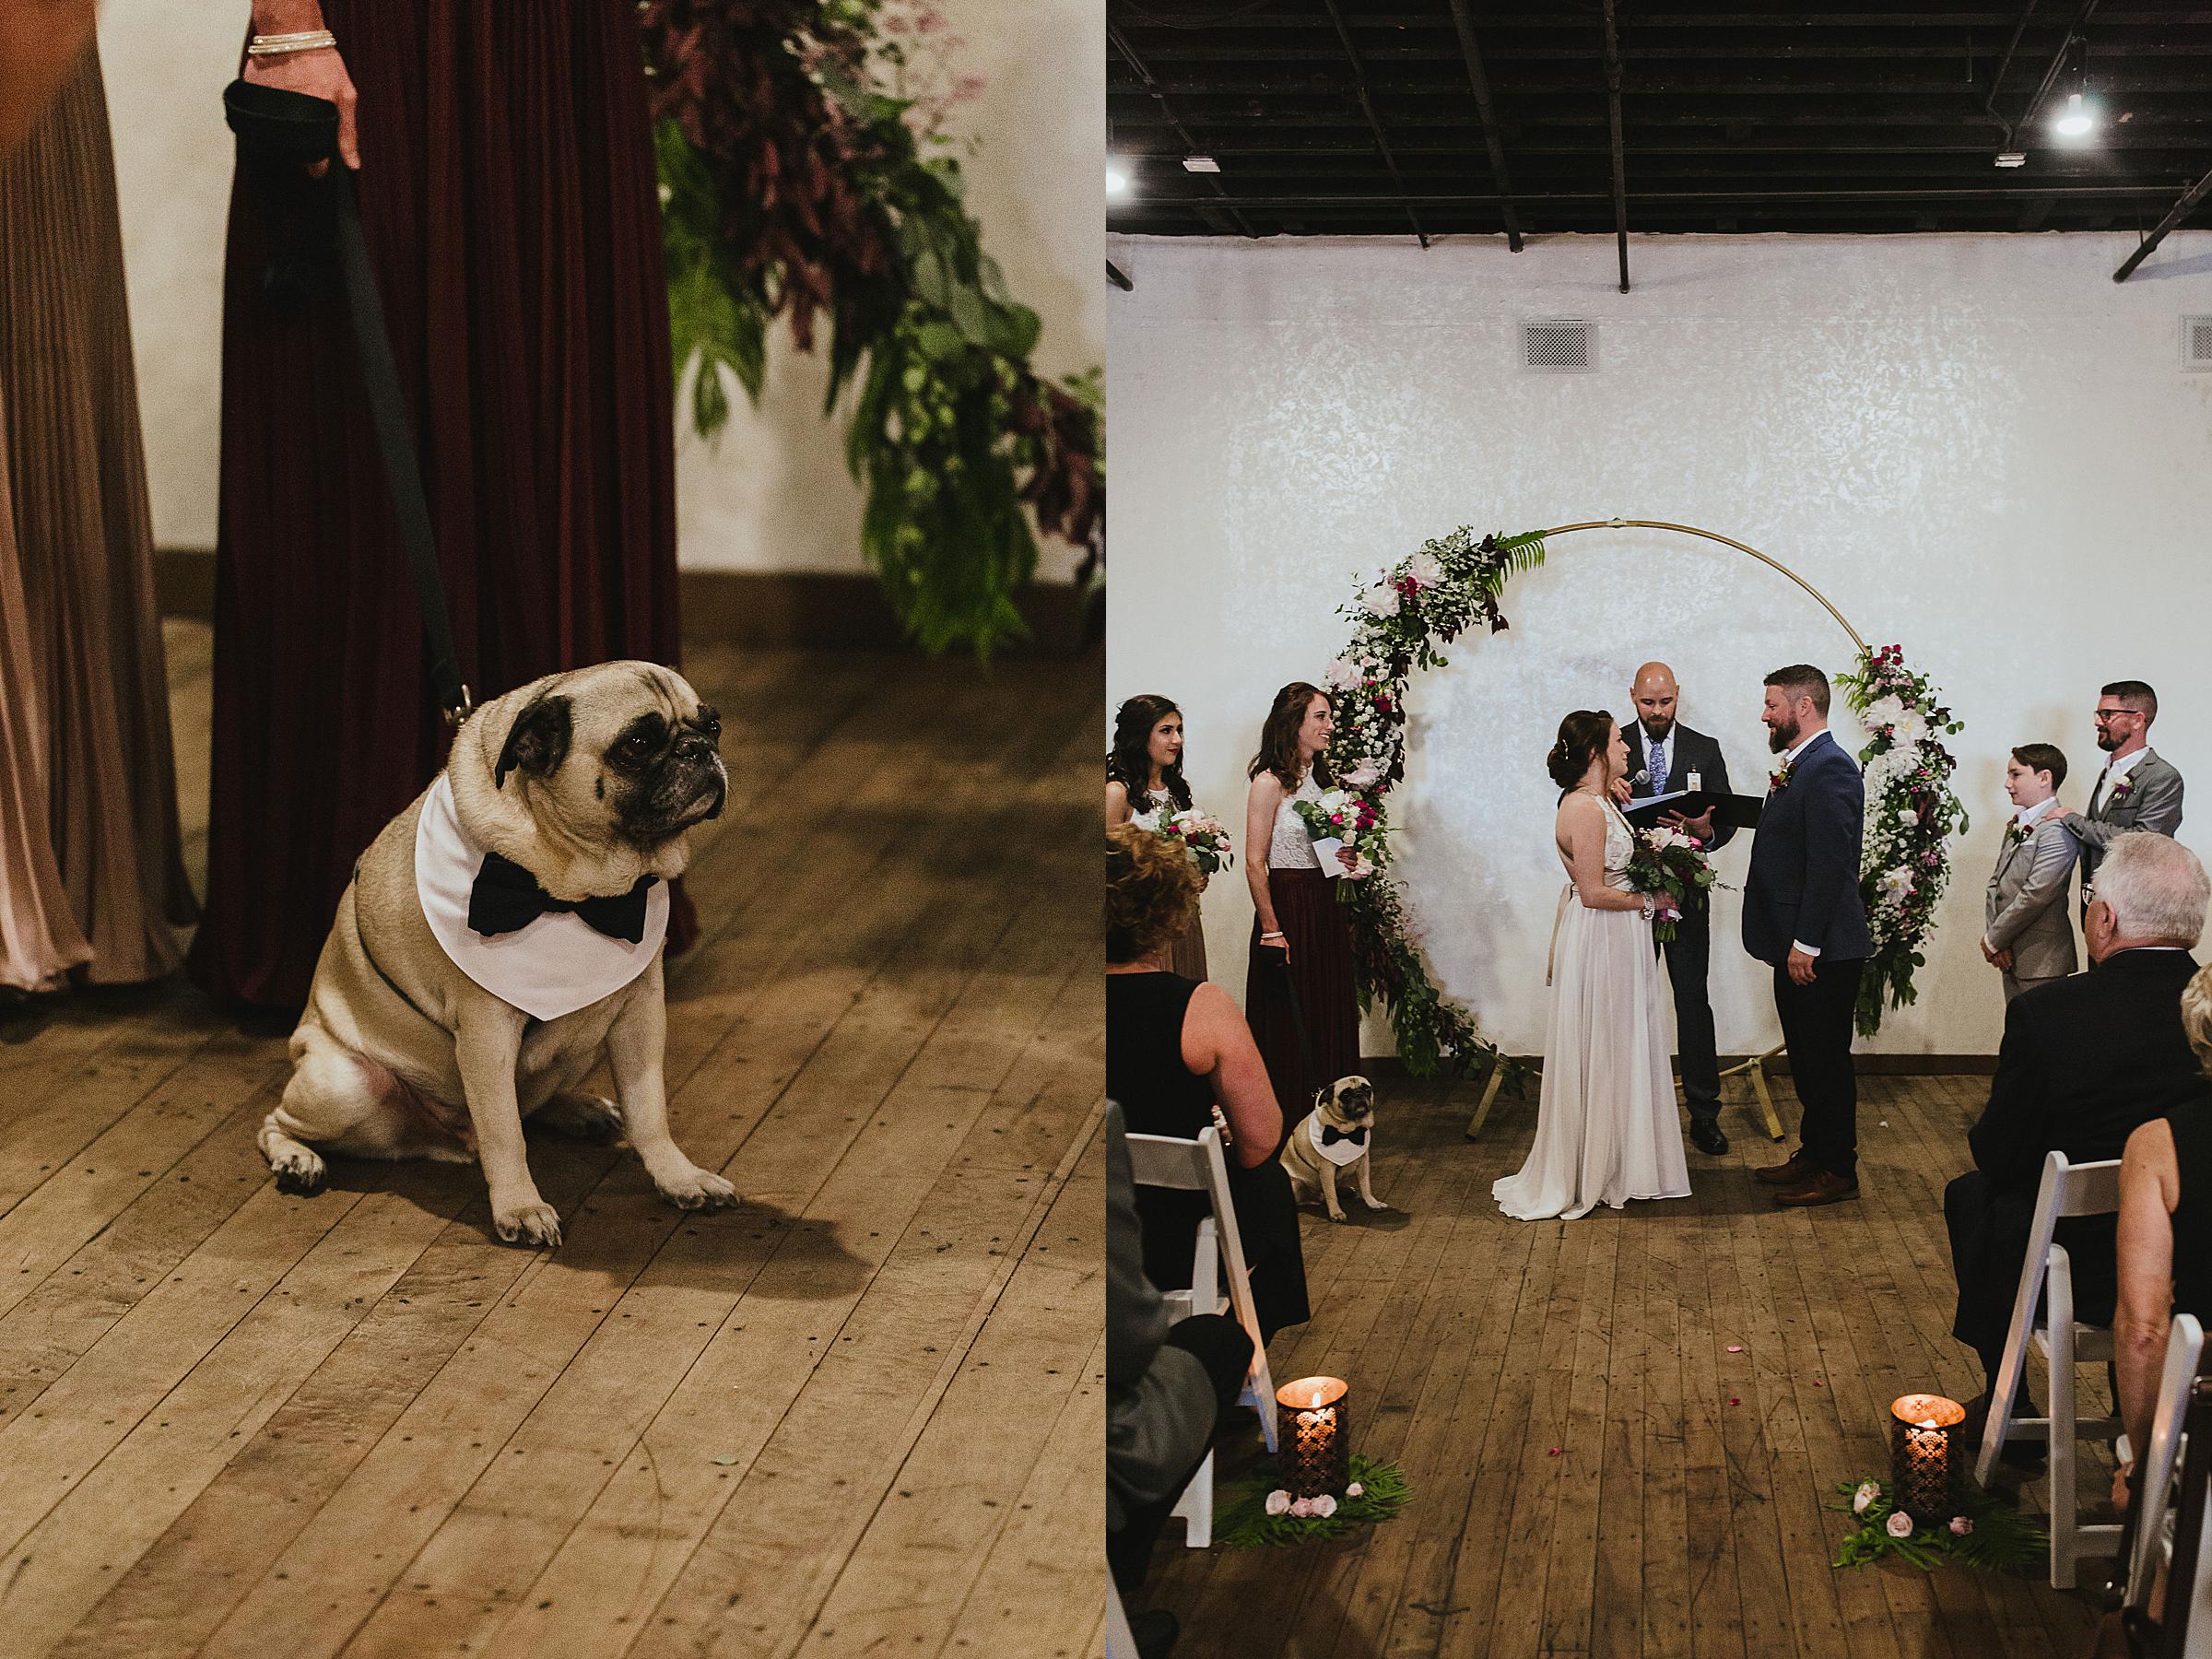 Omaha Wedding; Ceremony at Vintage Ballroom in the Old Market; Florals by One & Only; Photographed by Juliana Montane Photography